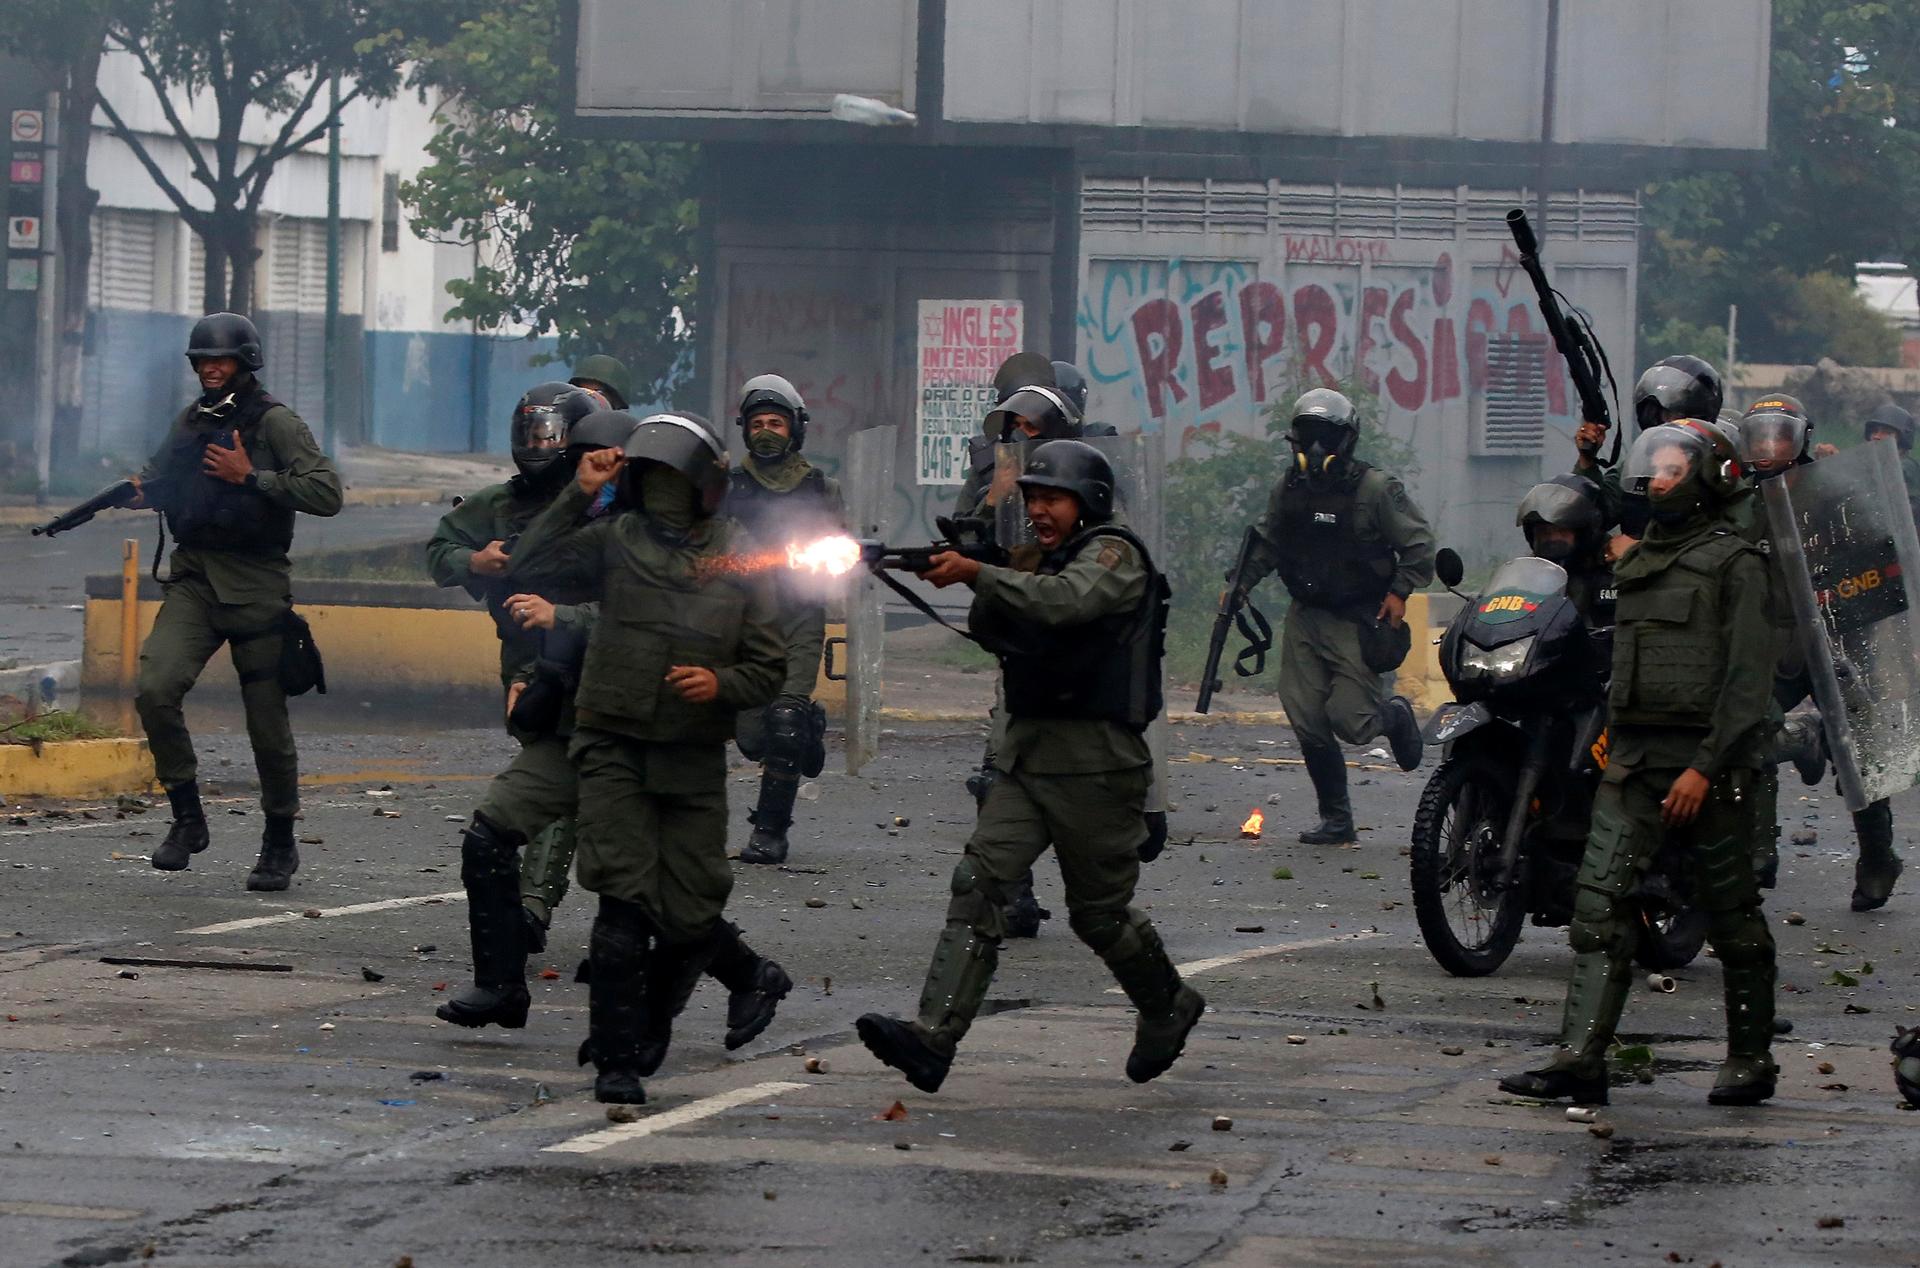 Riot security forces clashing with demonstrators rallying against Venezuela's President Nicolás Maduro's government in Caracas, Venezuela, on July 28.